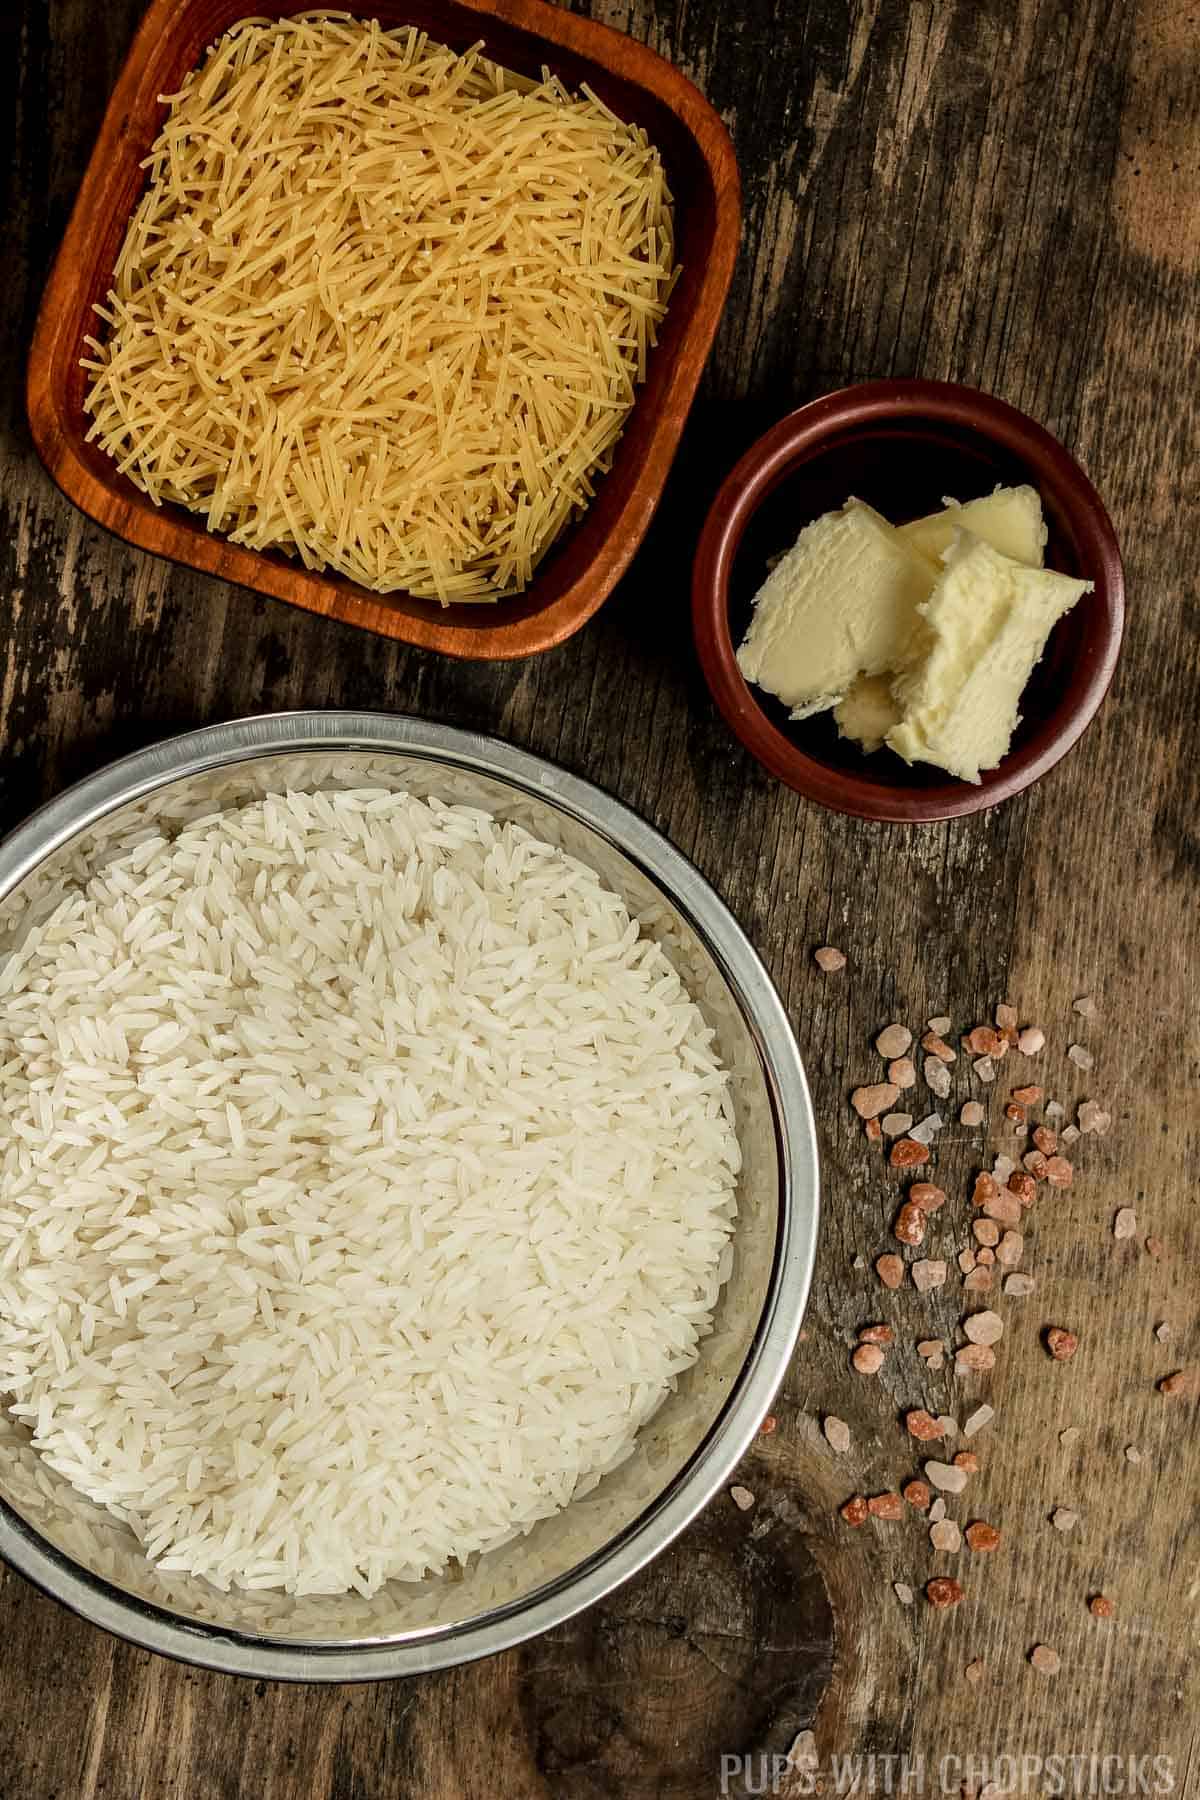 Ingredients for vermicelli rice (rice, vermicelli pasta, butter, salt)